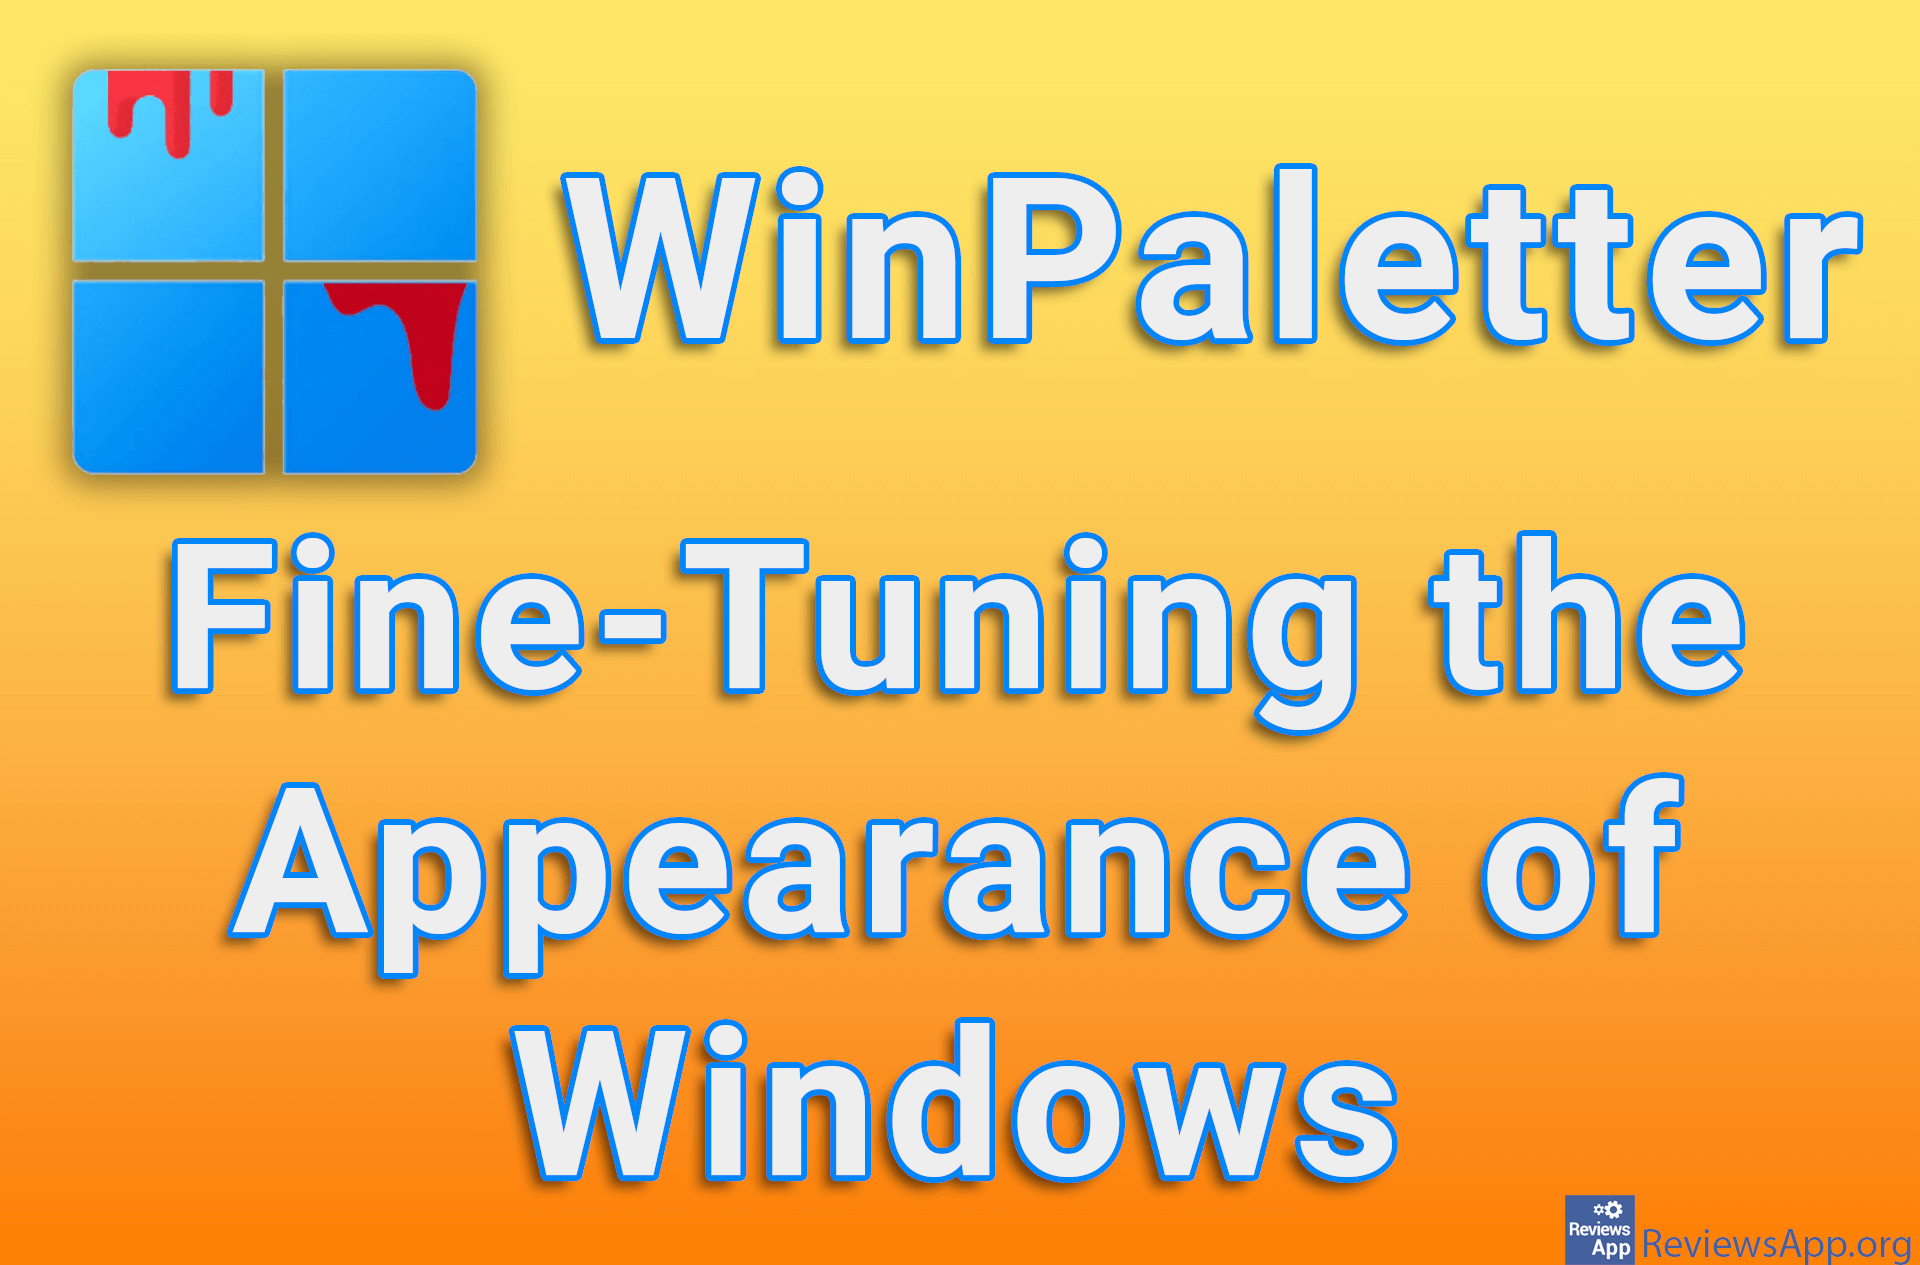 WinPaletter – Fine-Tuning the Appearance of Windows